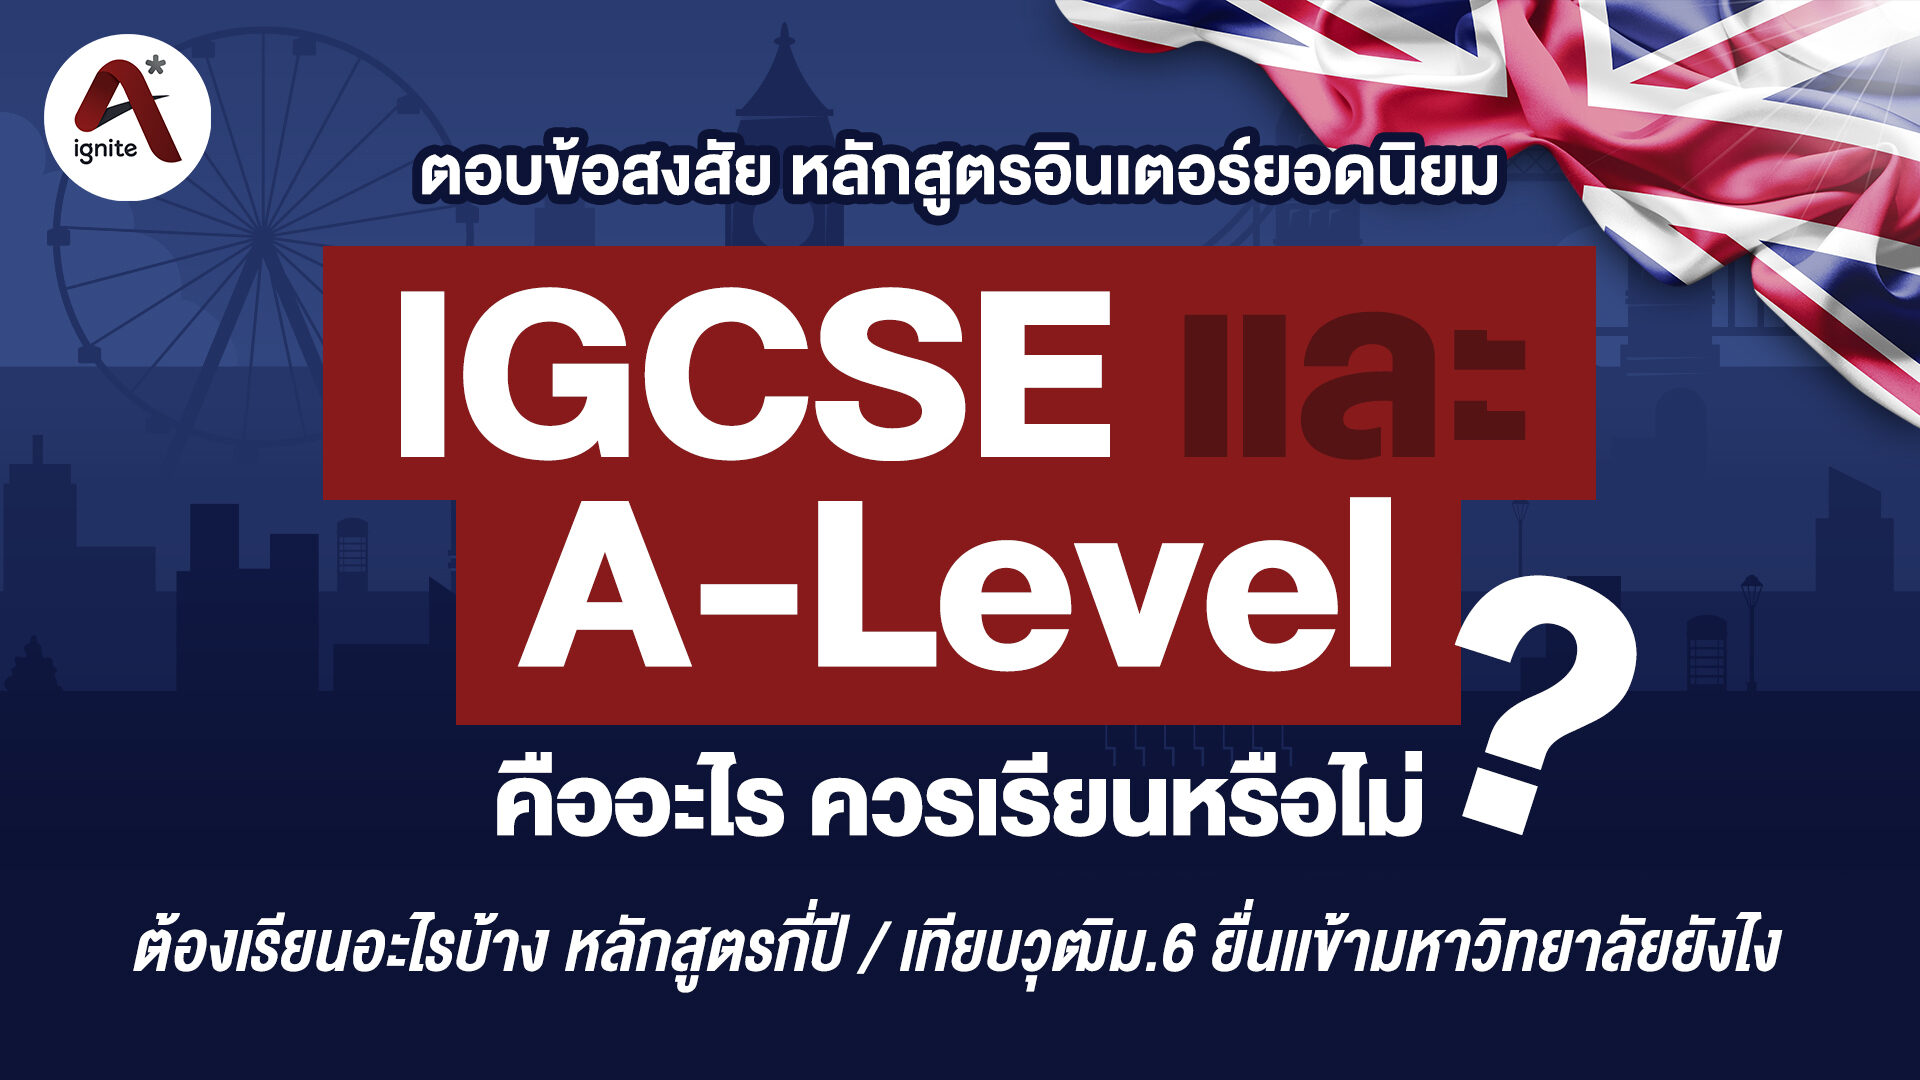 what are the differents between igcse vs a level